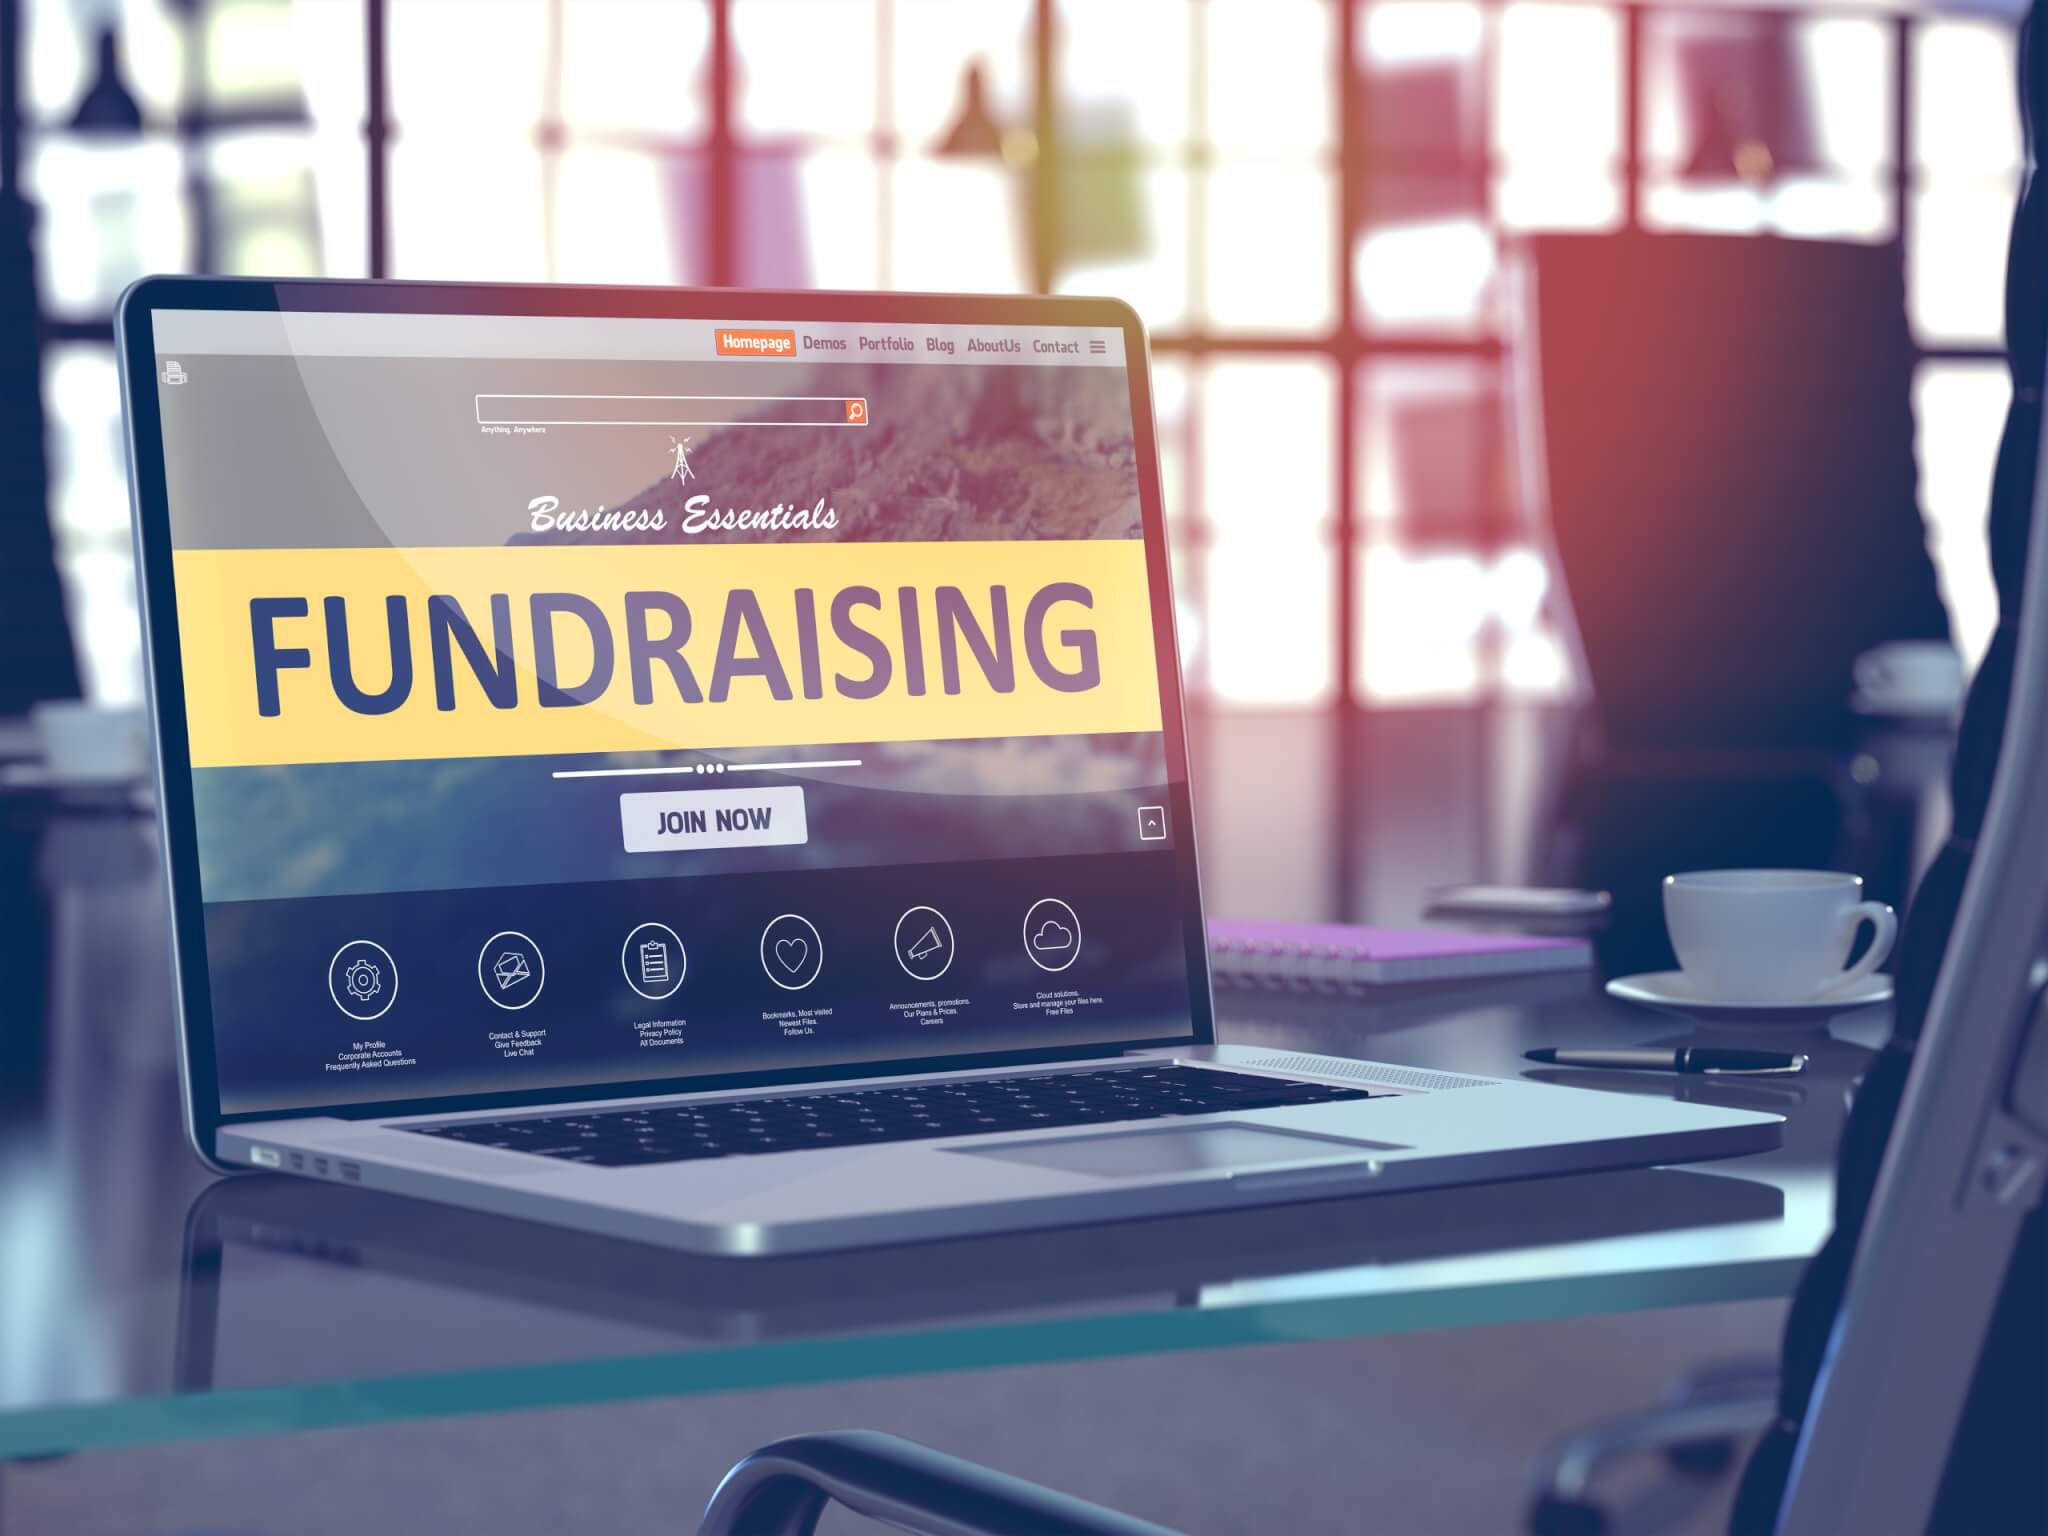 How to embed a donation page on my site – Neon One